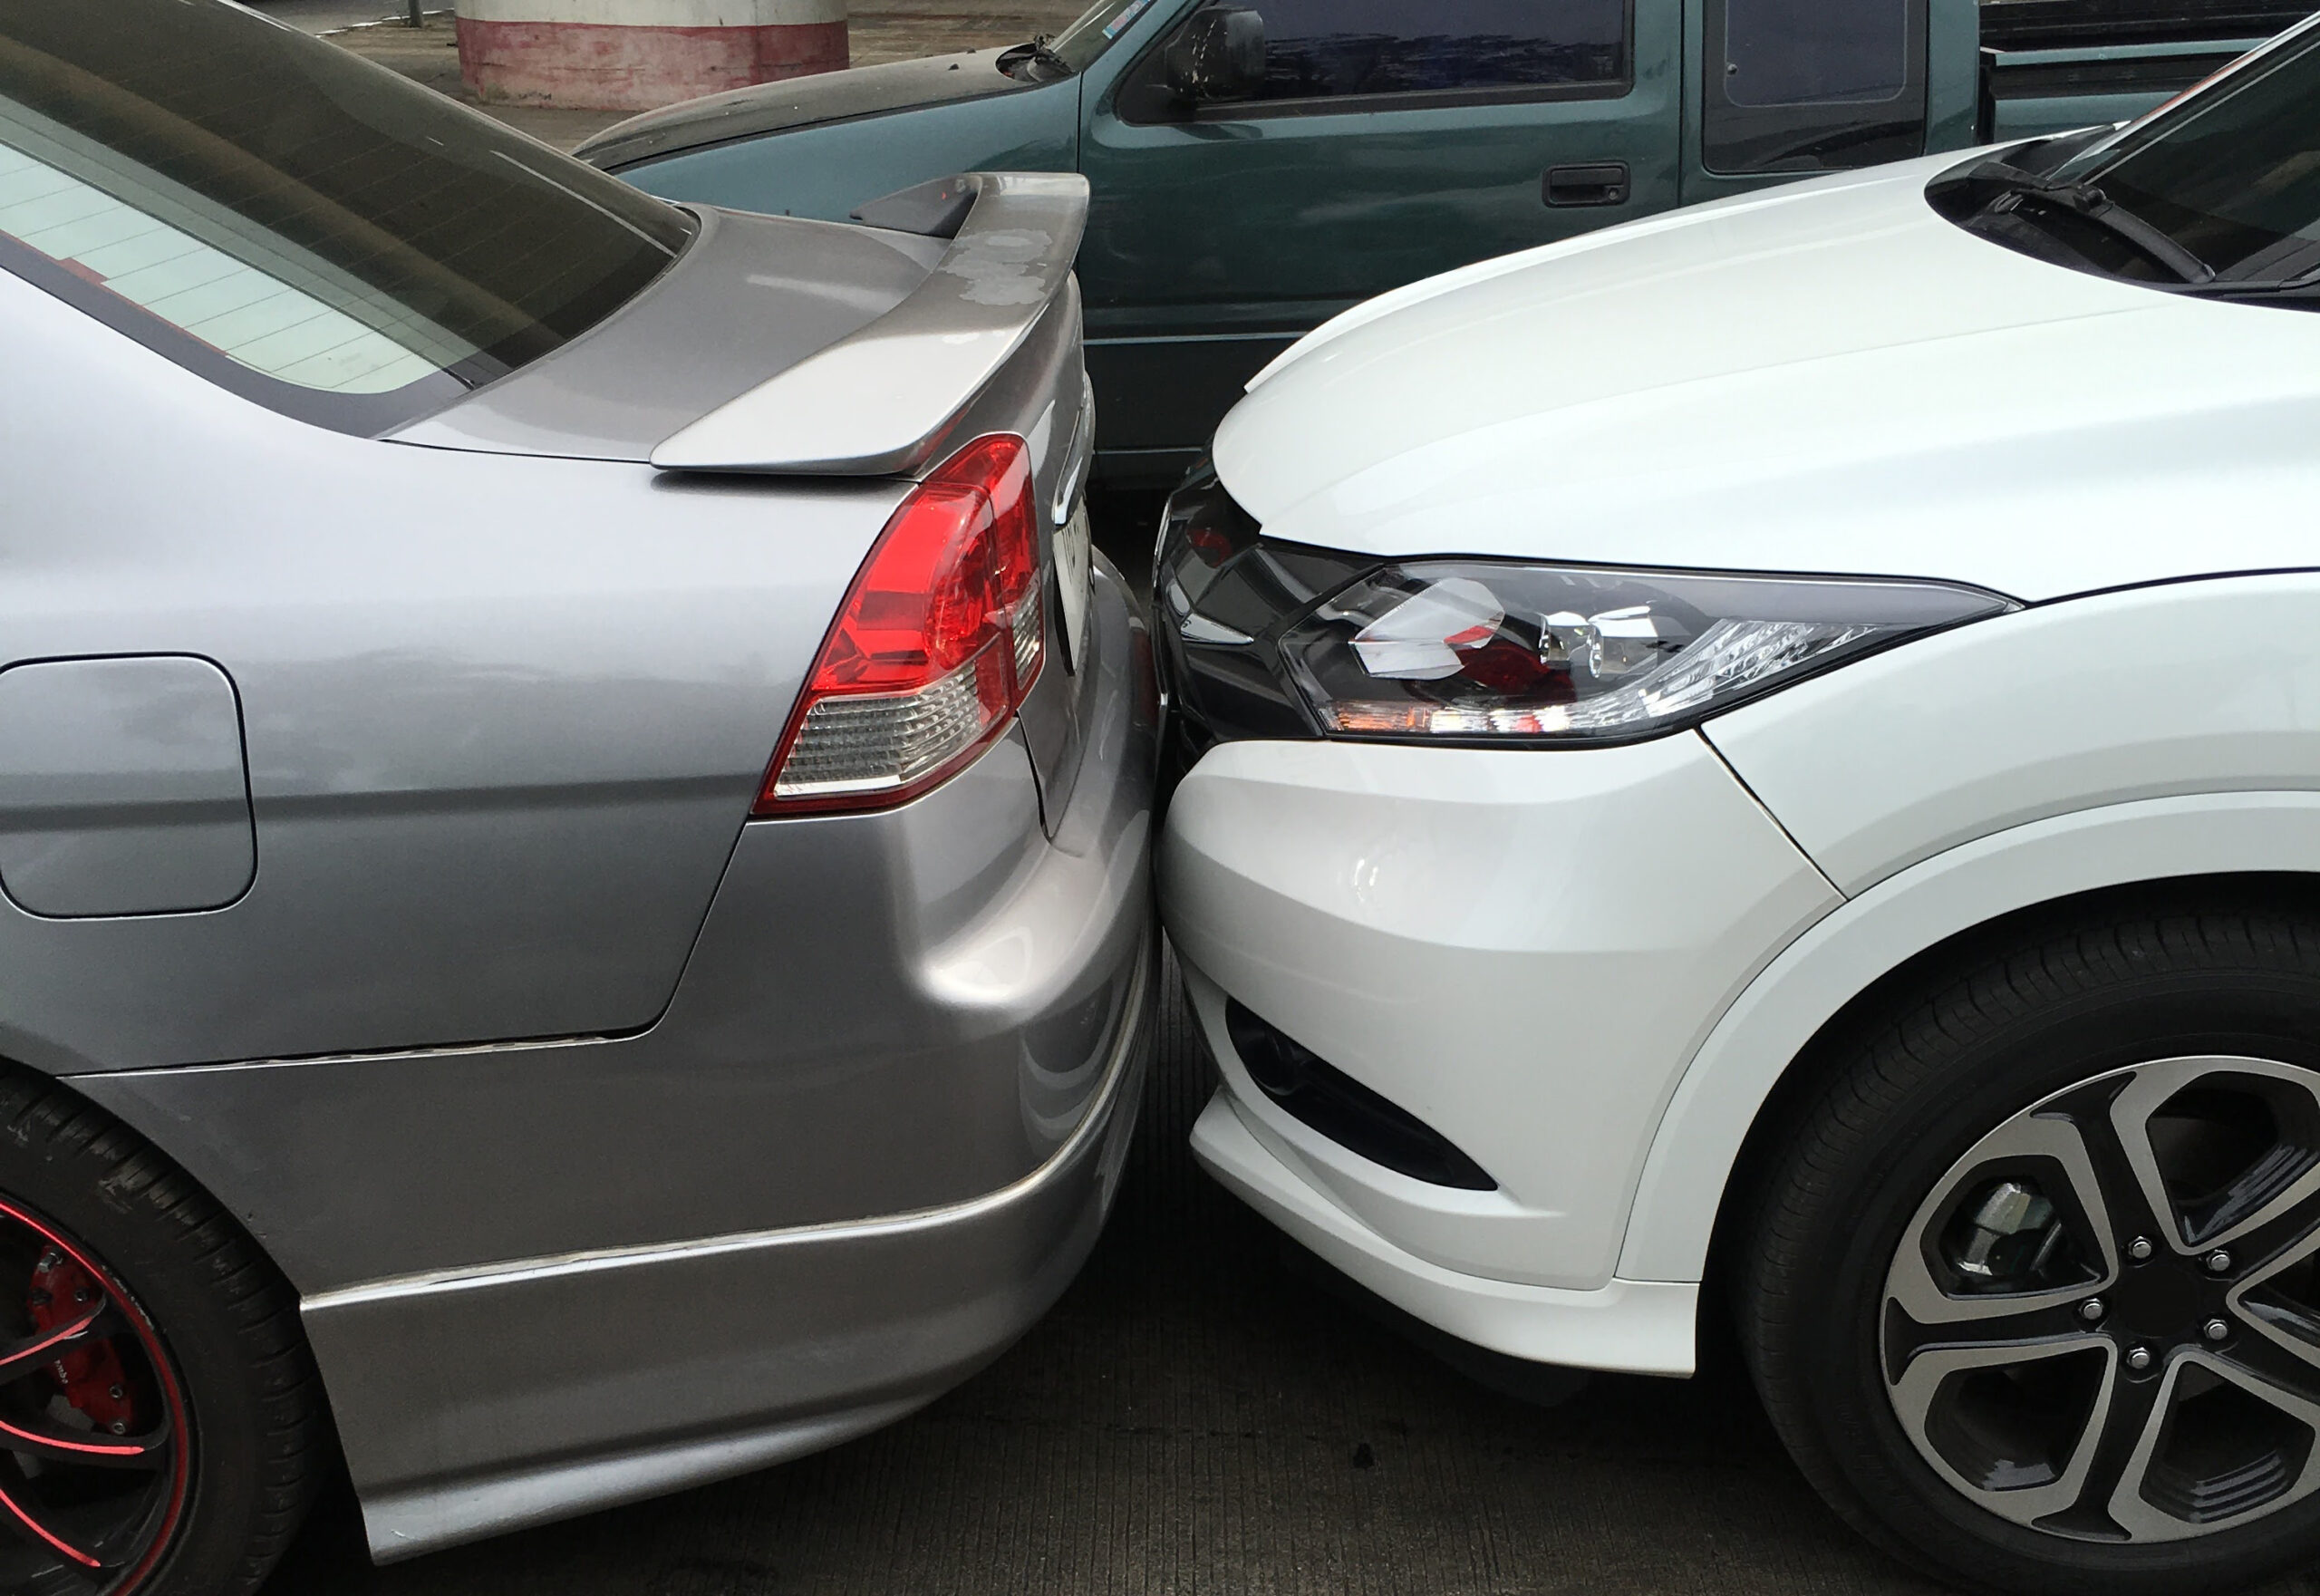 Featured Image for: Who Is at Fault in a Rear-end Accident?